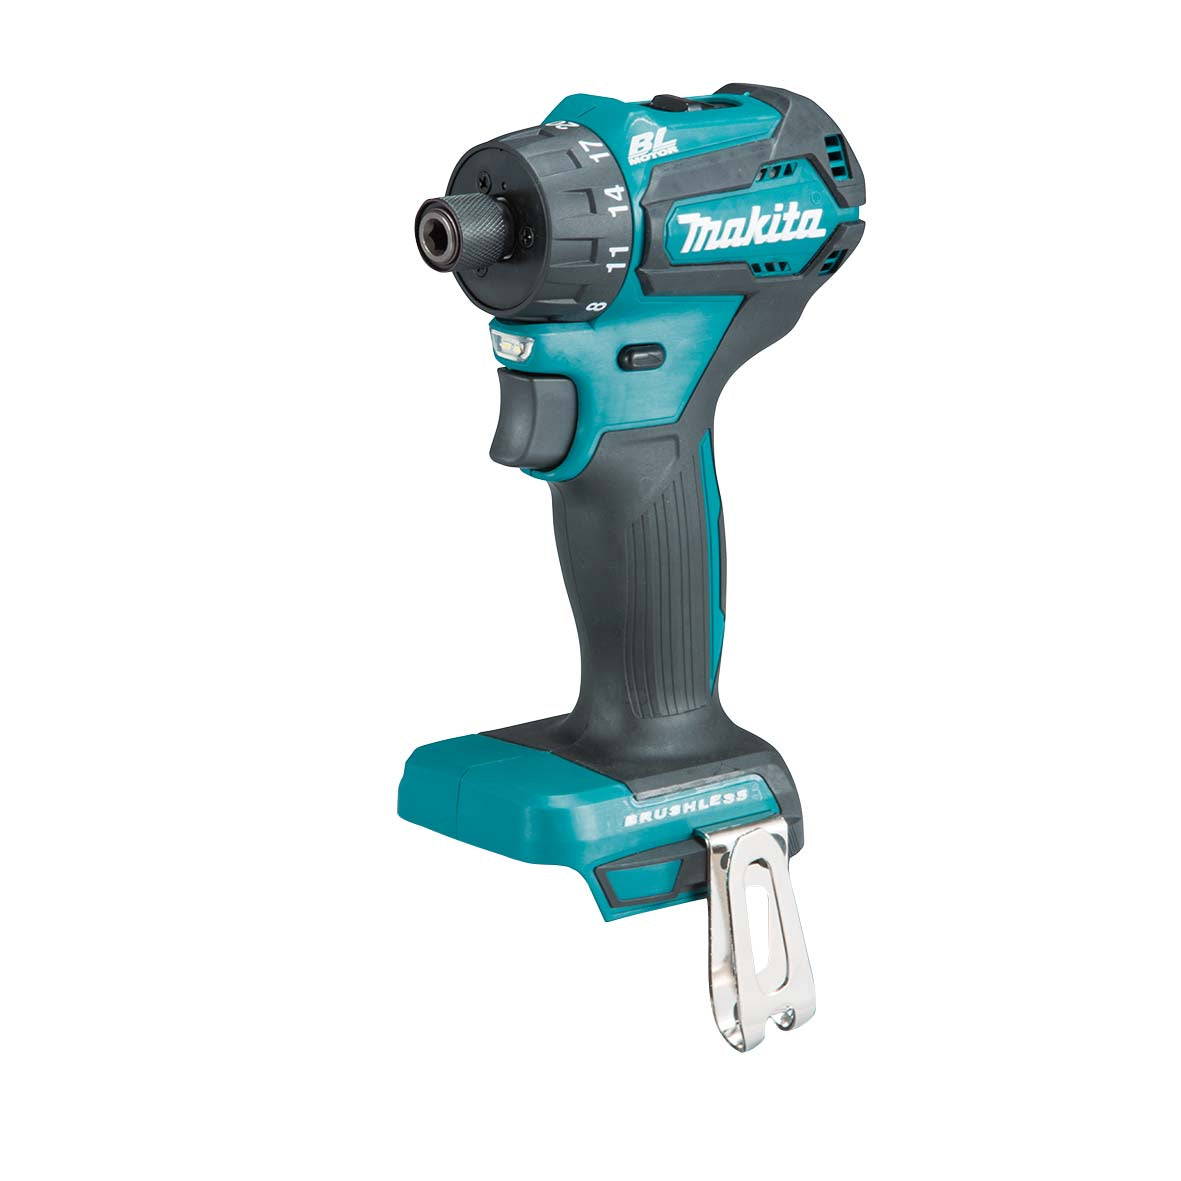 18V Brushless Sub-Compact 1/4" Hex Chuck Driver Drill Bare (Tool Only) DDF083Z by Makita